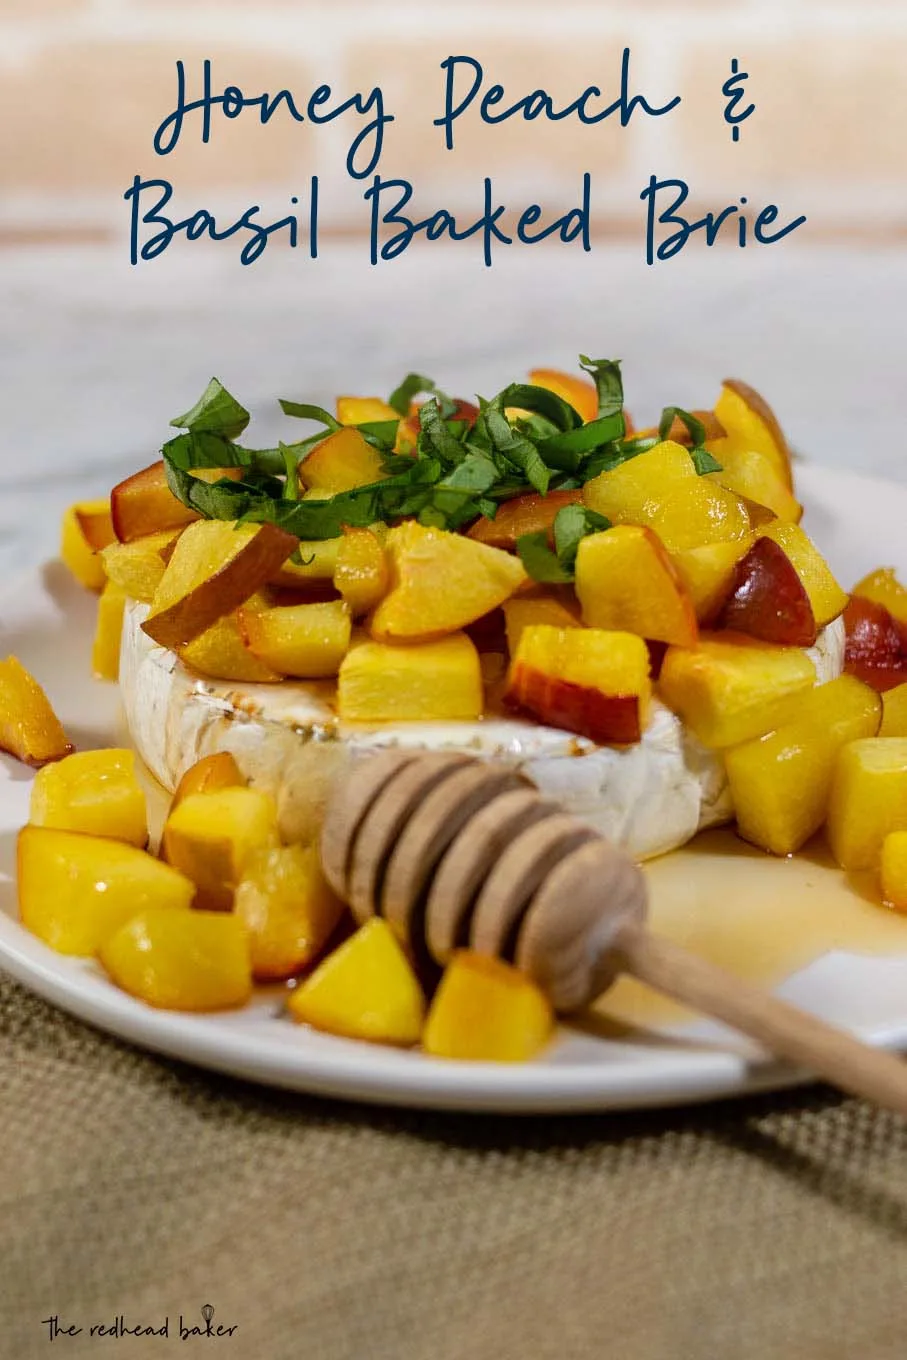 Think baked brie is only for winter holidays? Think again! Honey, basil and peach baked brie uses the freshest flavors of the summer to complement the buttery cheese. 